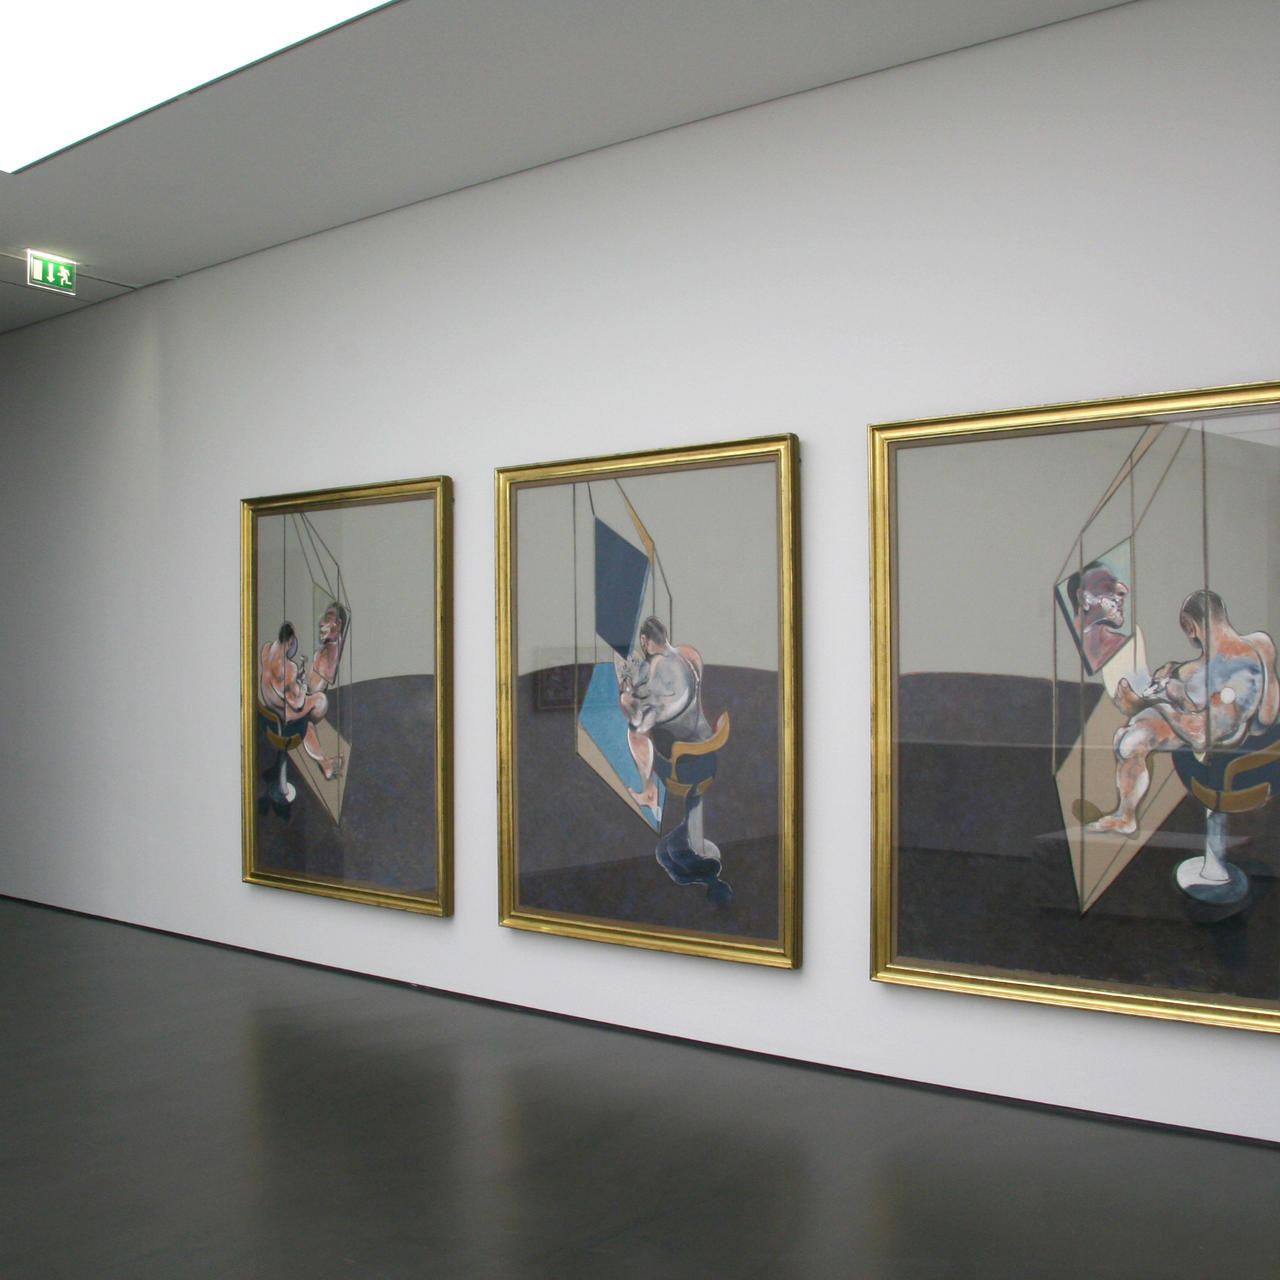 Work by Francis Bacon